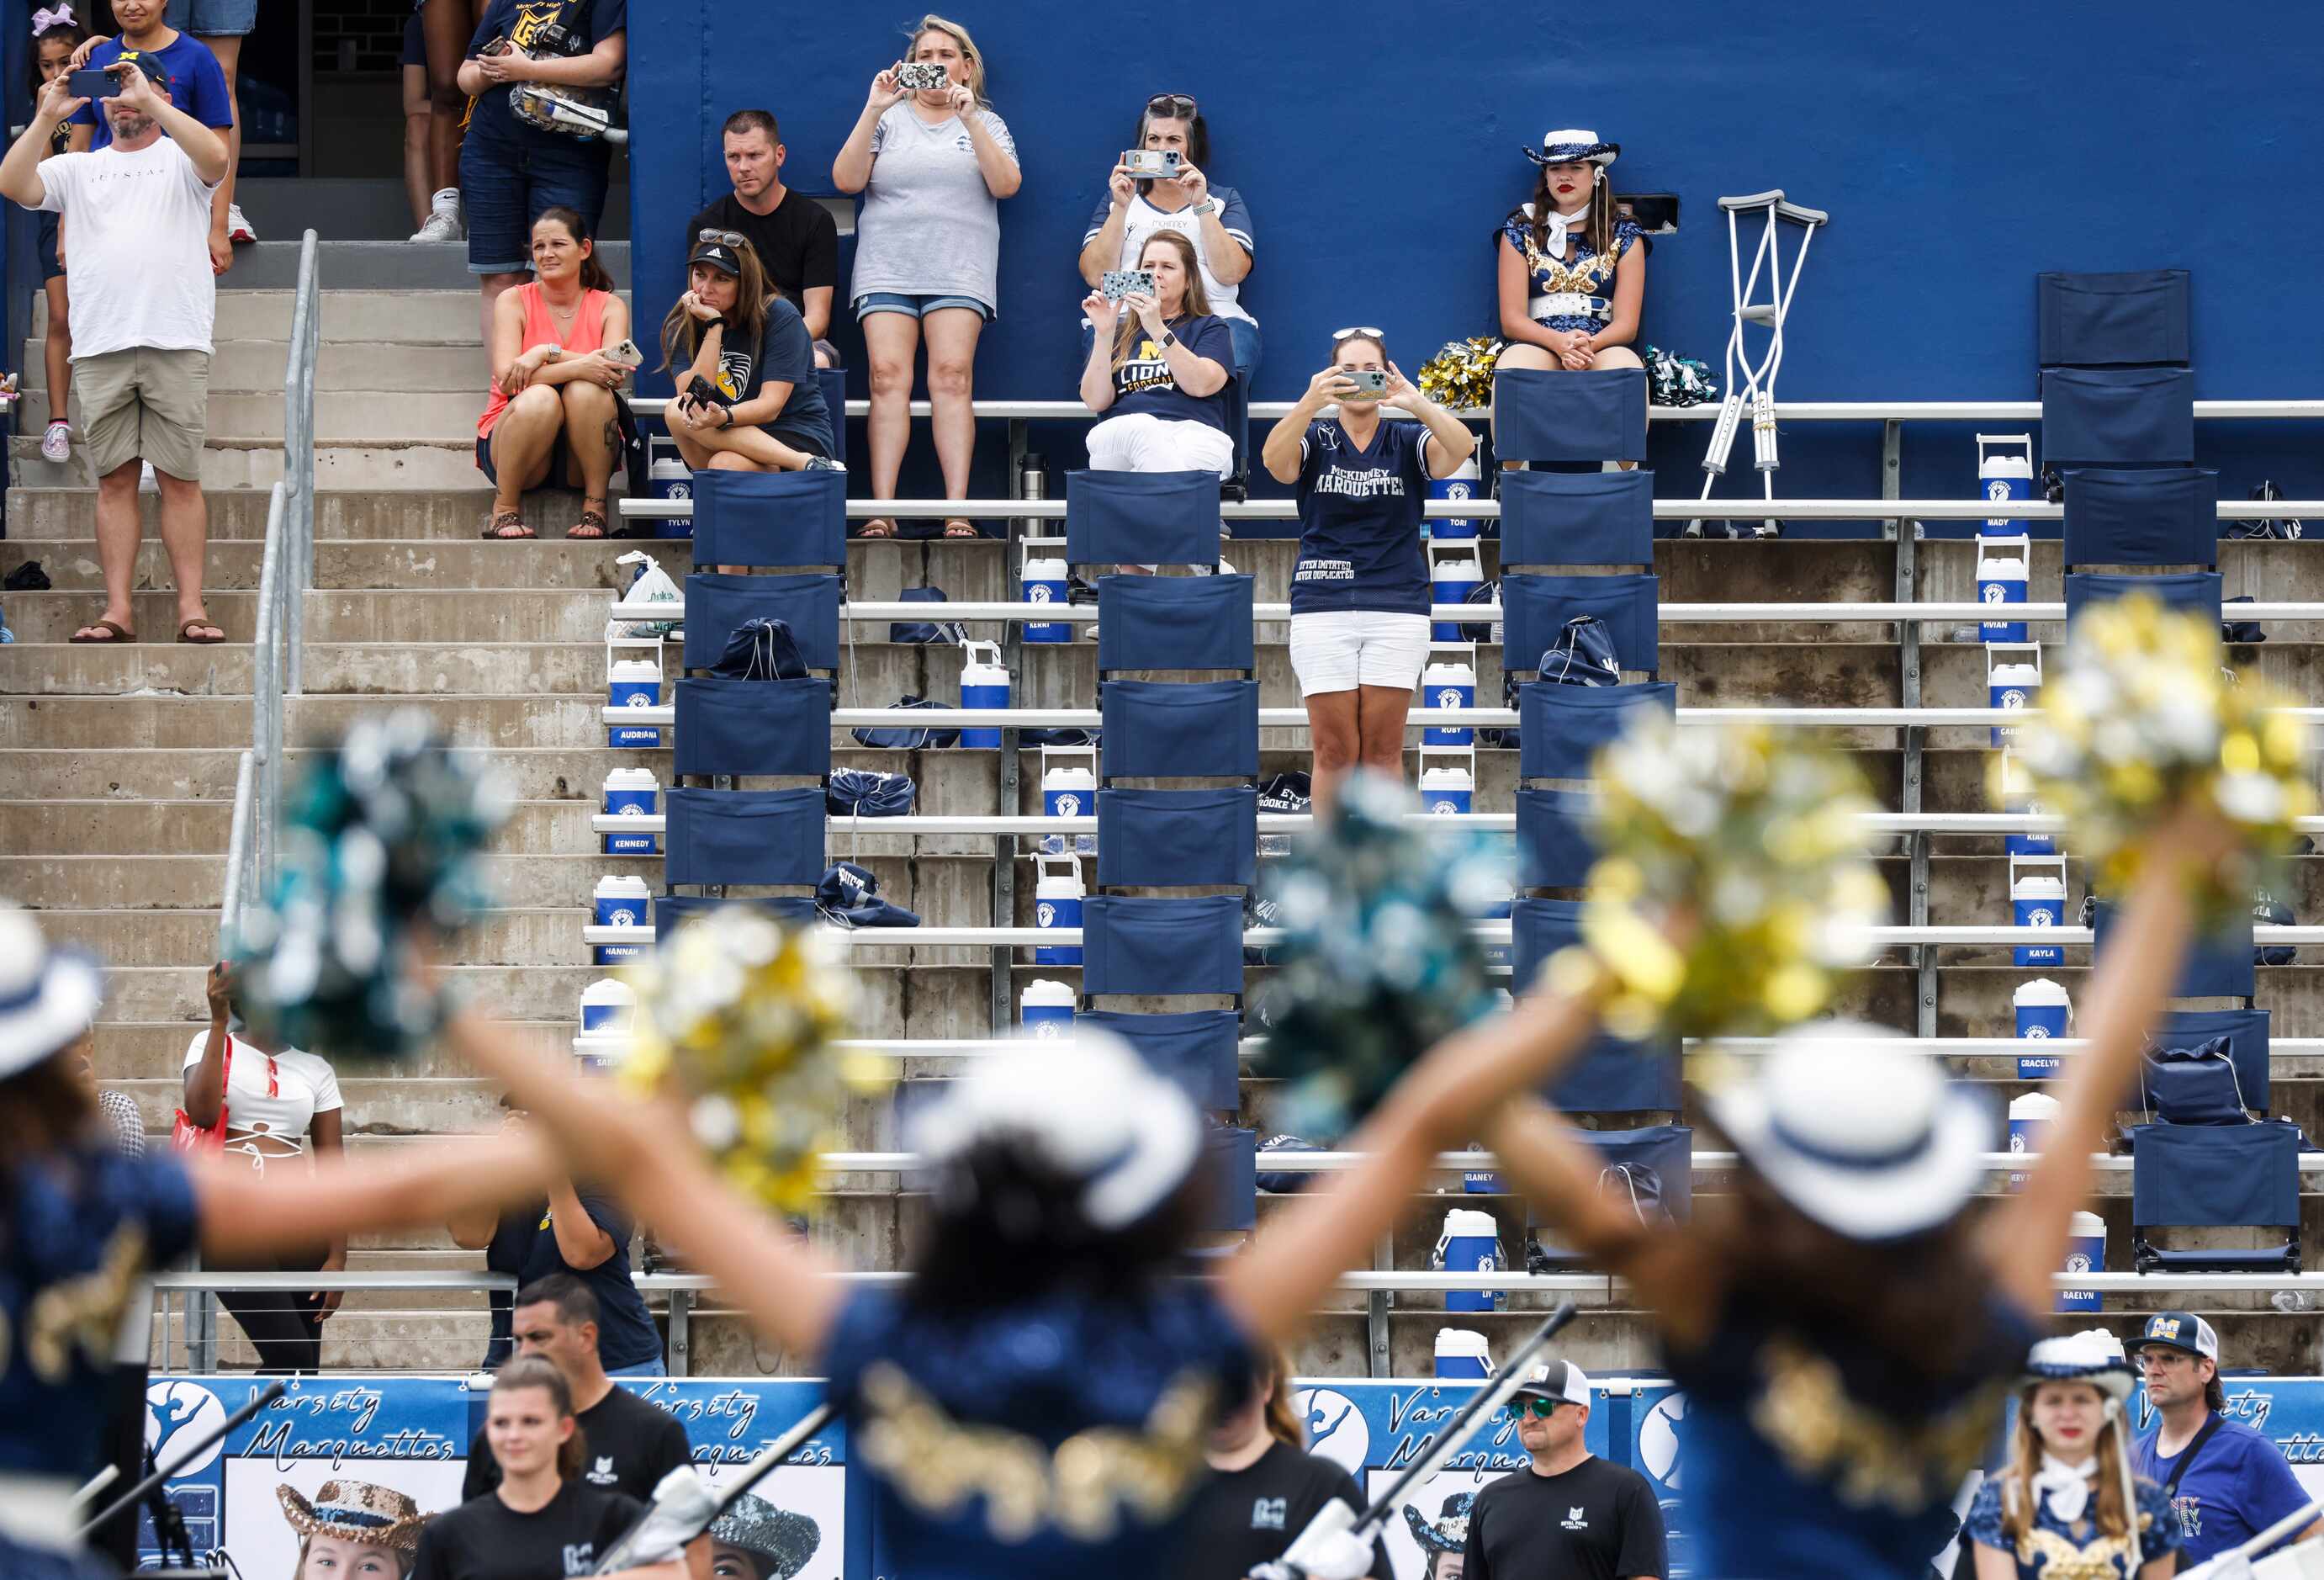 Crowds watch as McKinney Marquettes team performs after a season-opening football game...